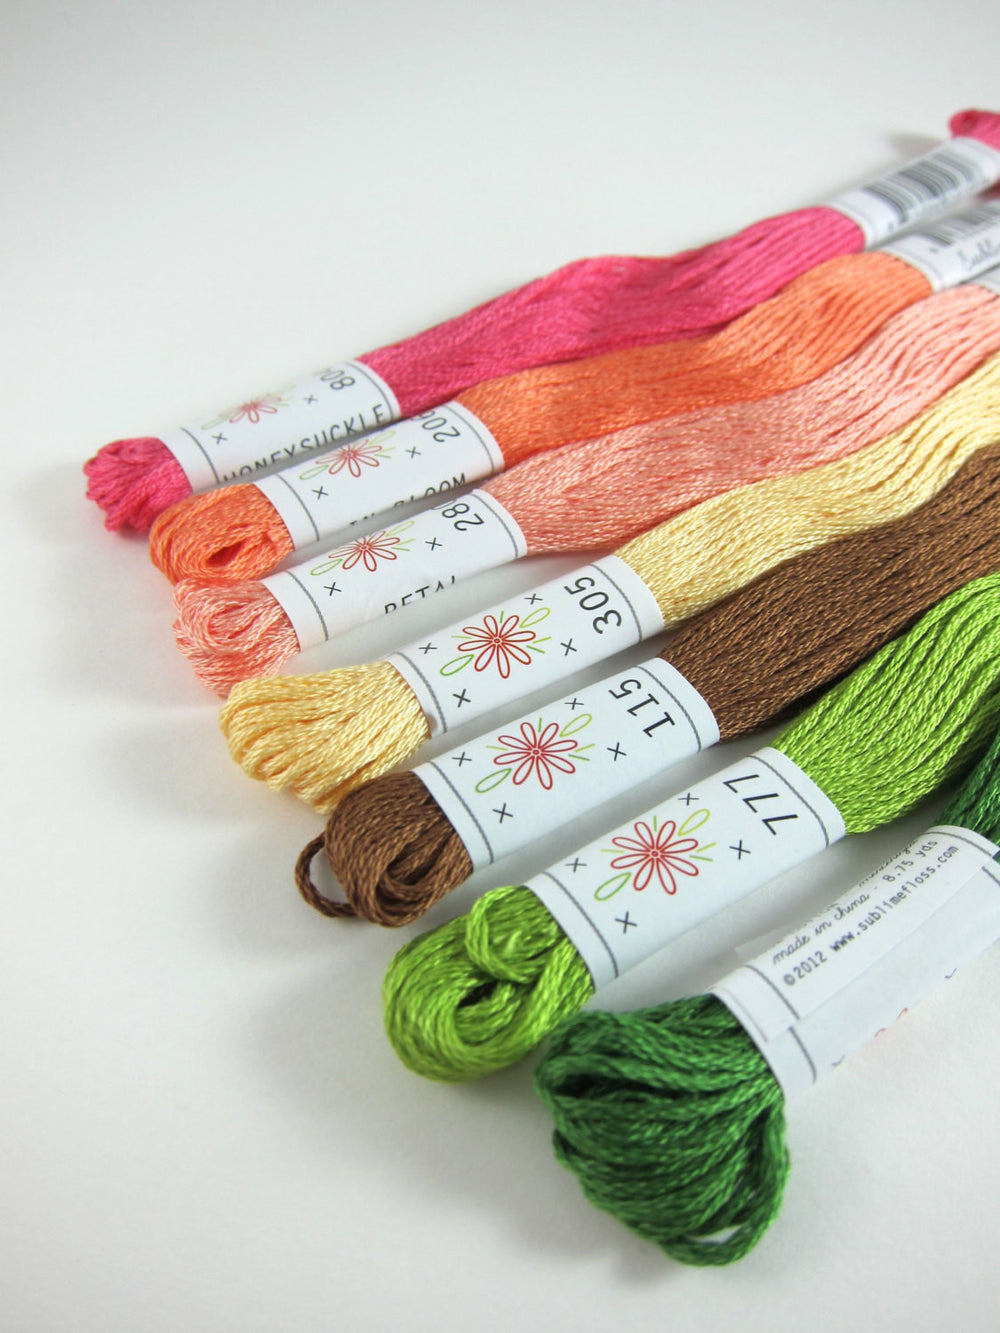 Sublime Stitching Embroidery Floss Set, Frosting Palette - Seven 8.75 yard  skeins